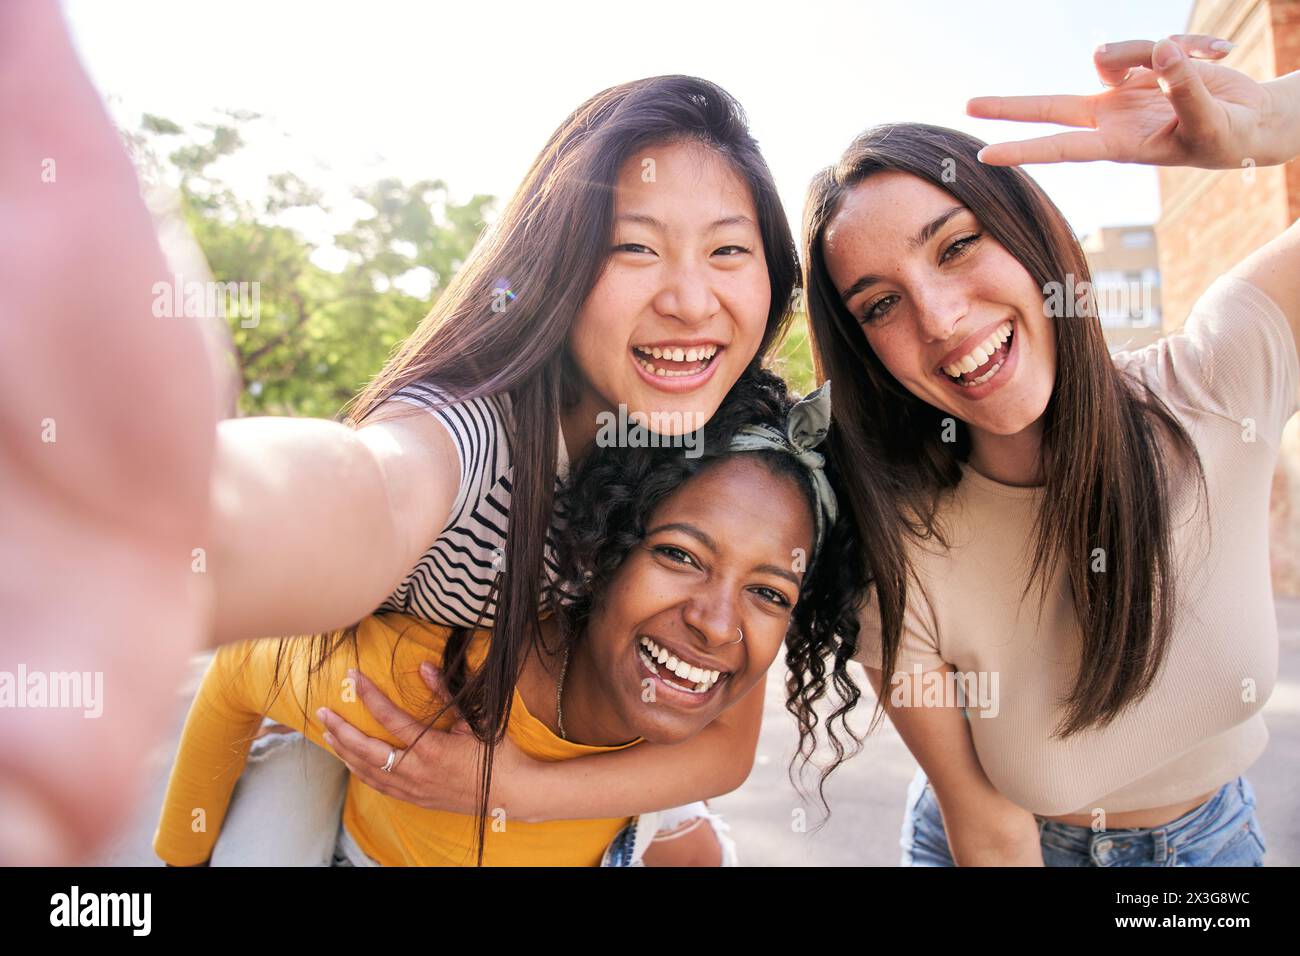 Group young multi-ethnic female taking smiling selfie portrait together outdoors. Excited friends. Stock Photo